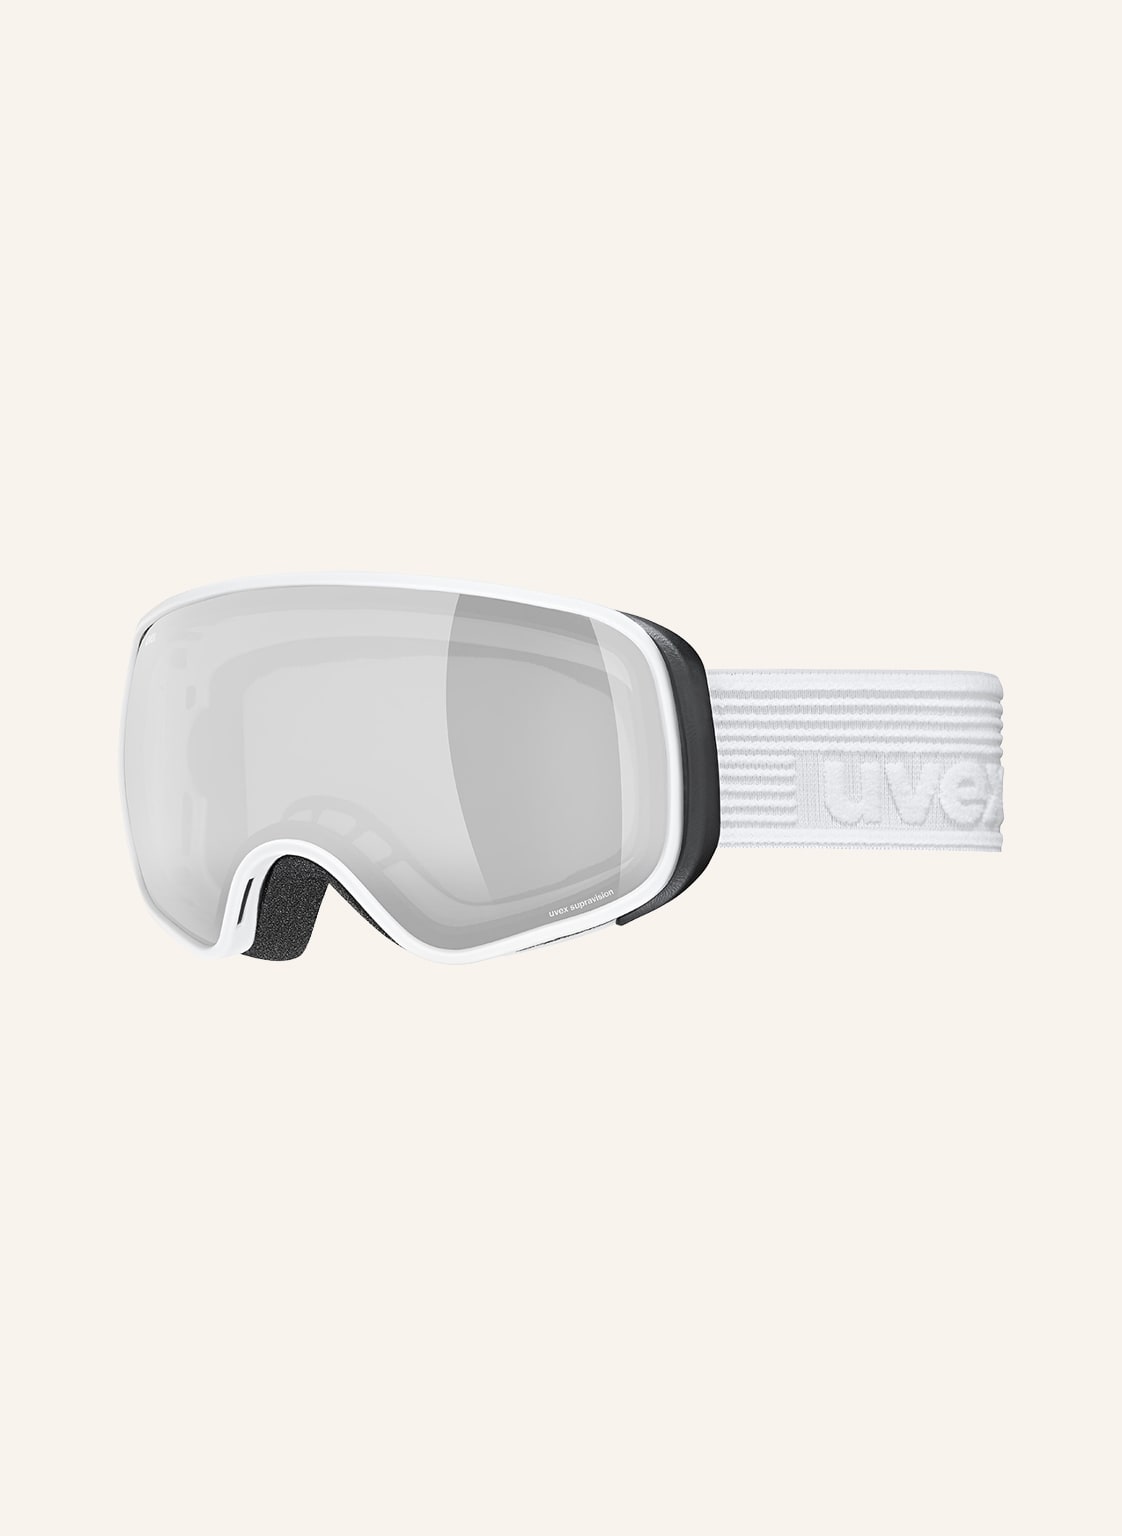 Image of Uvex Skibrille Scribble Fm weiss